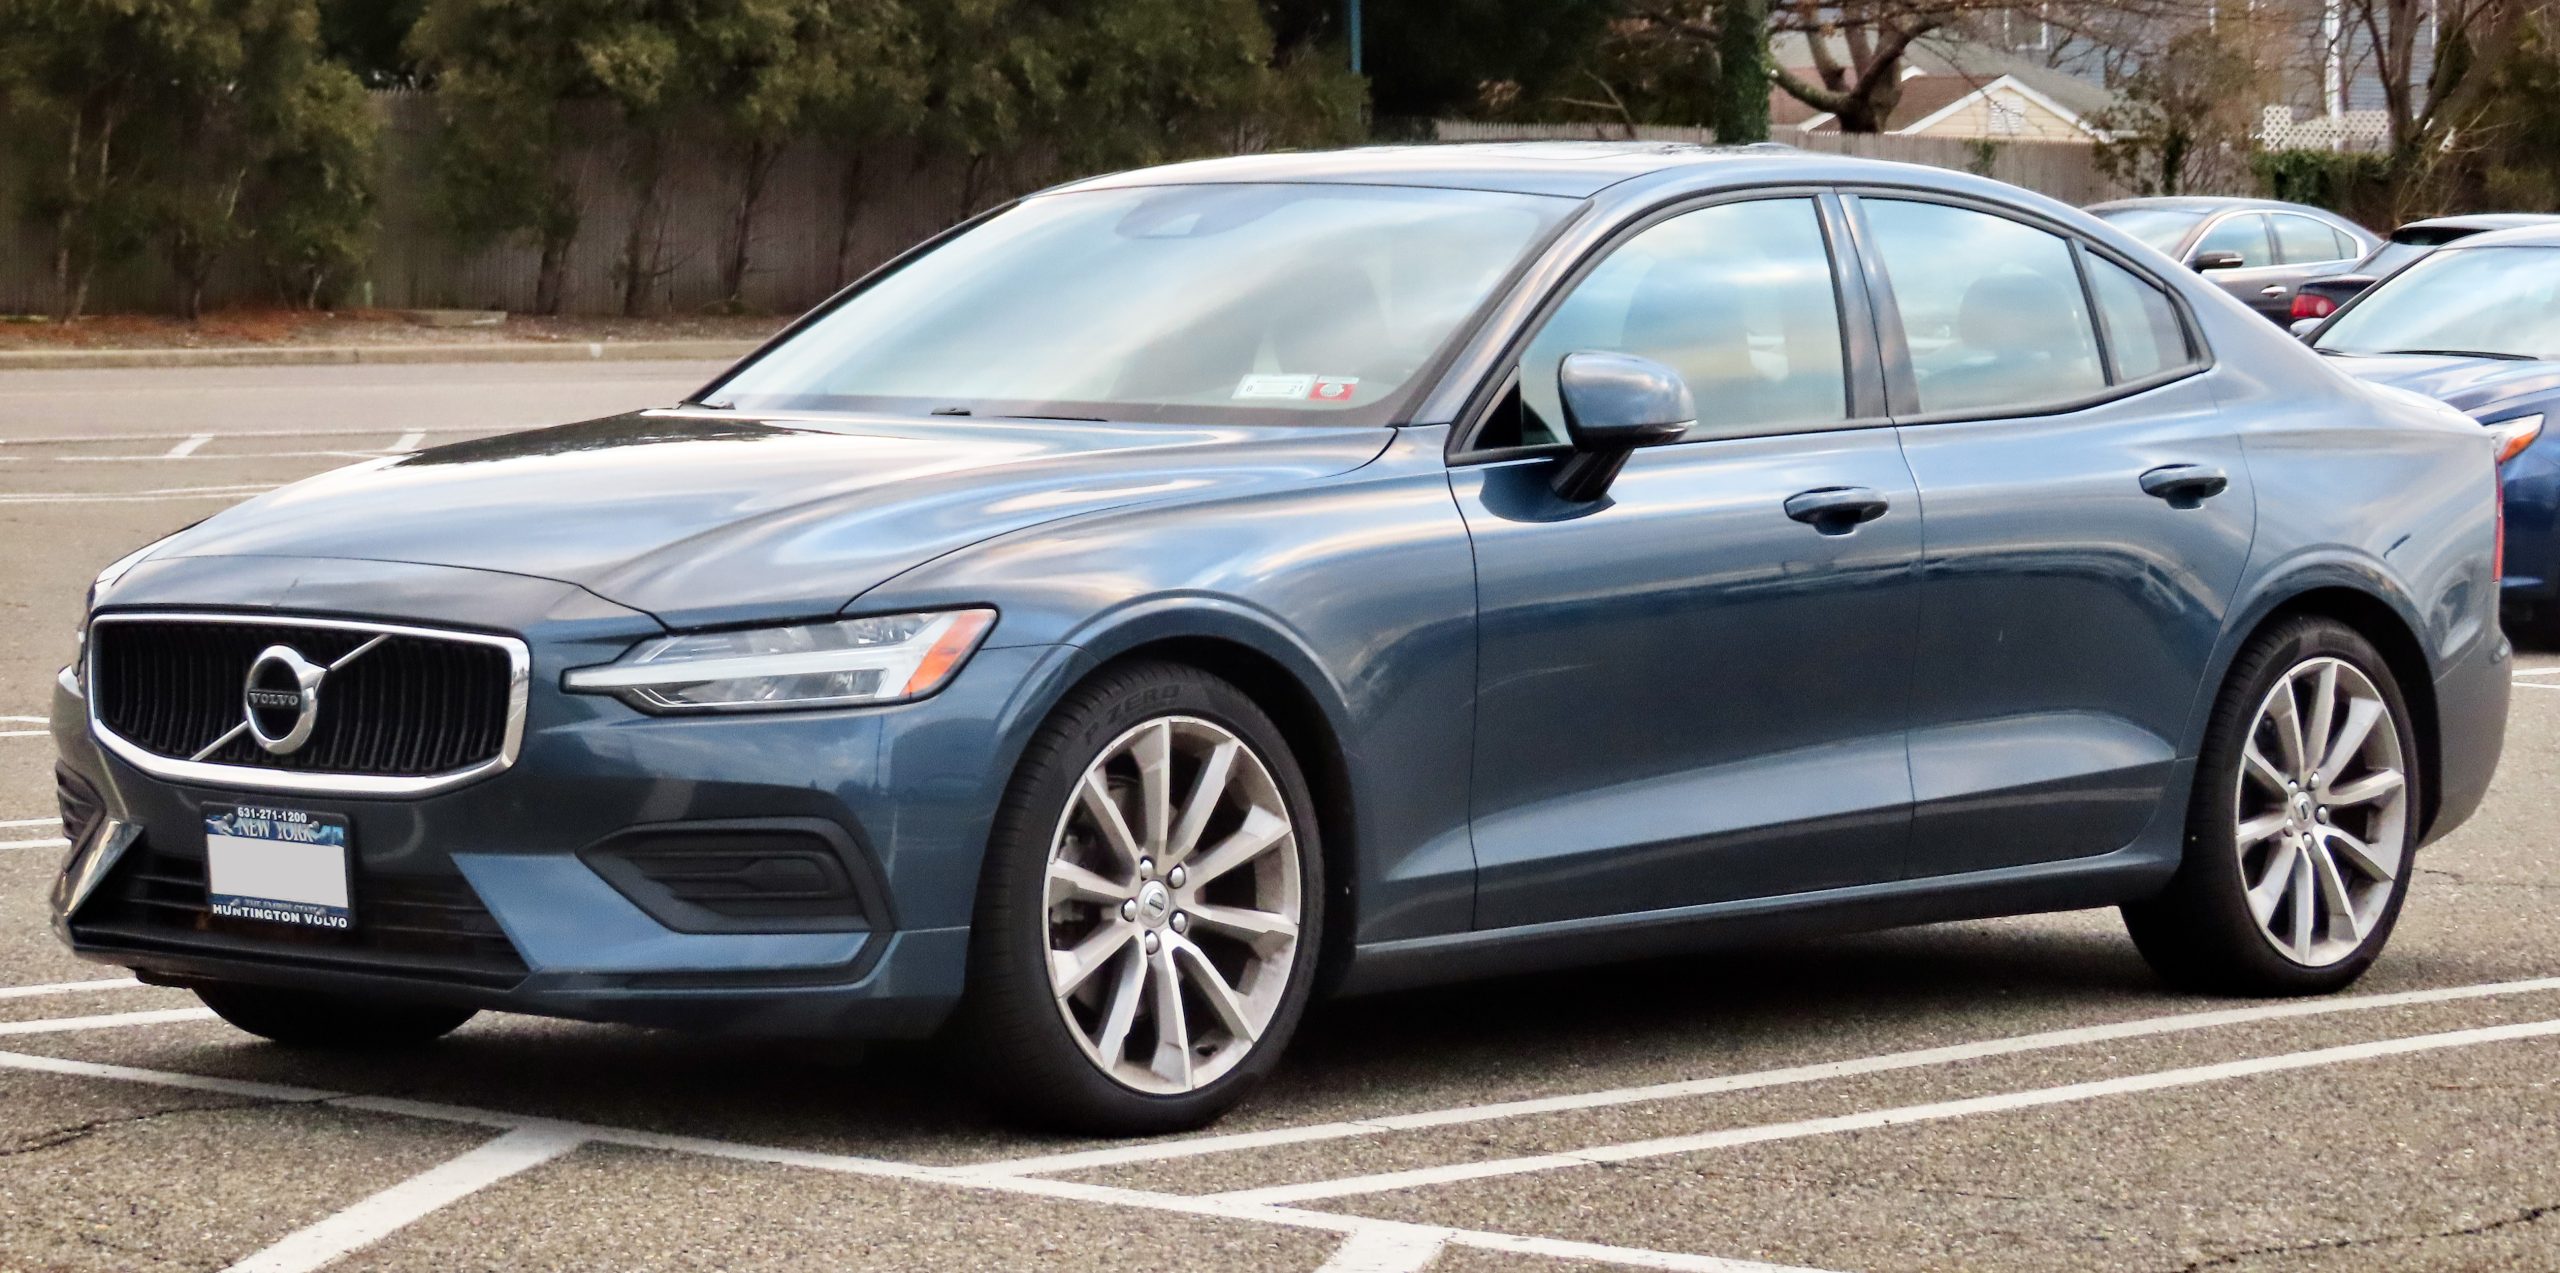 2019_volvo_s60_t5_front_1-26-20